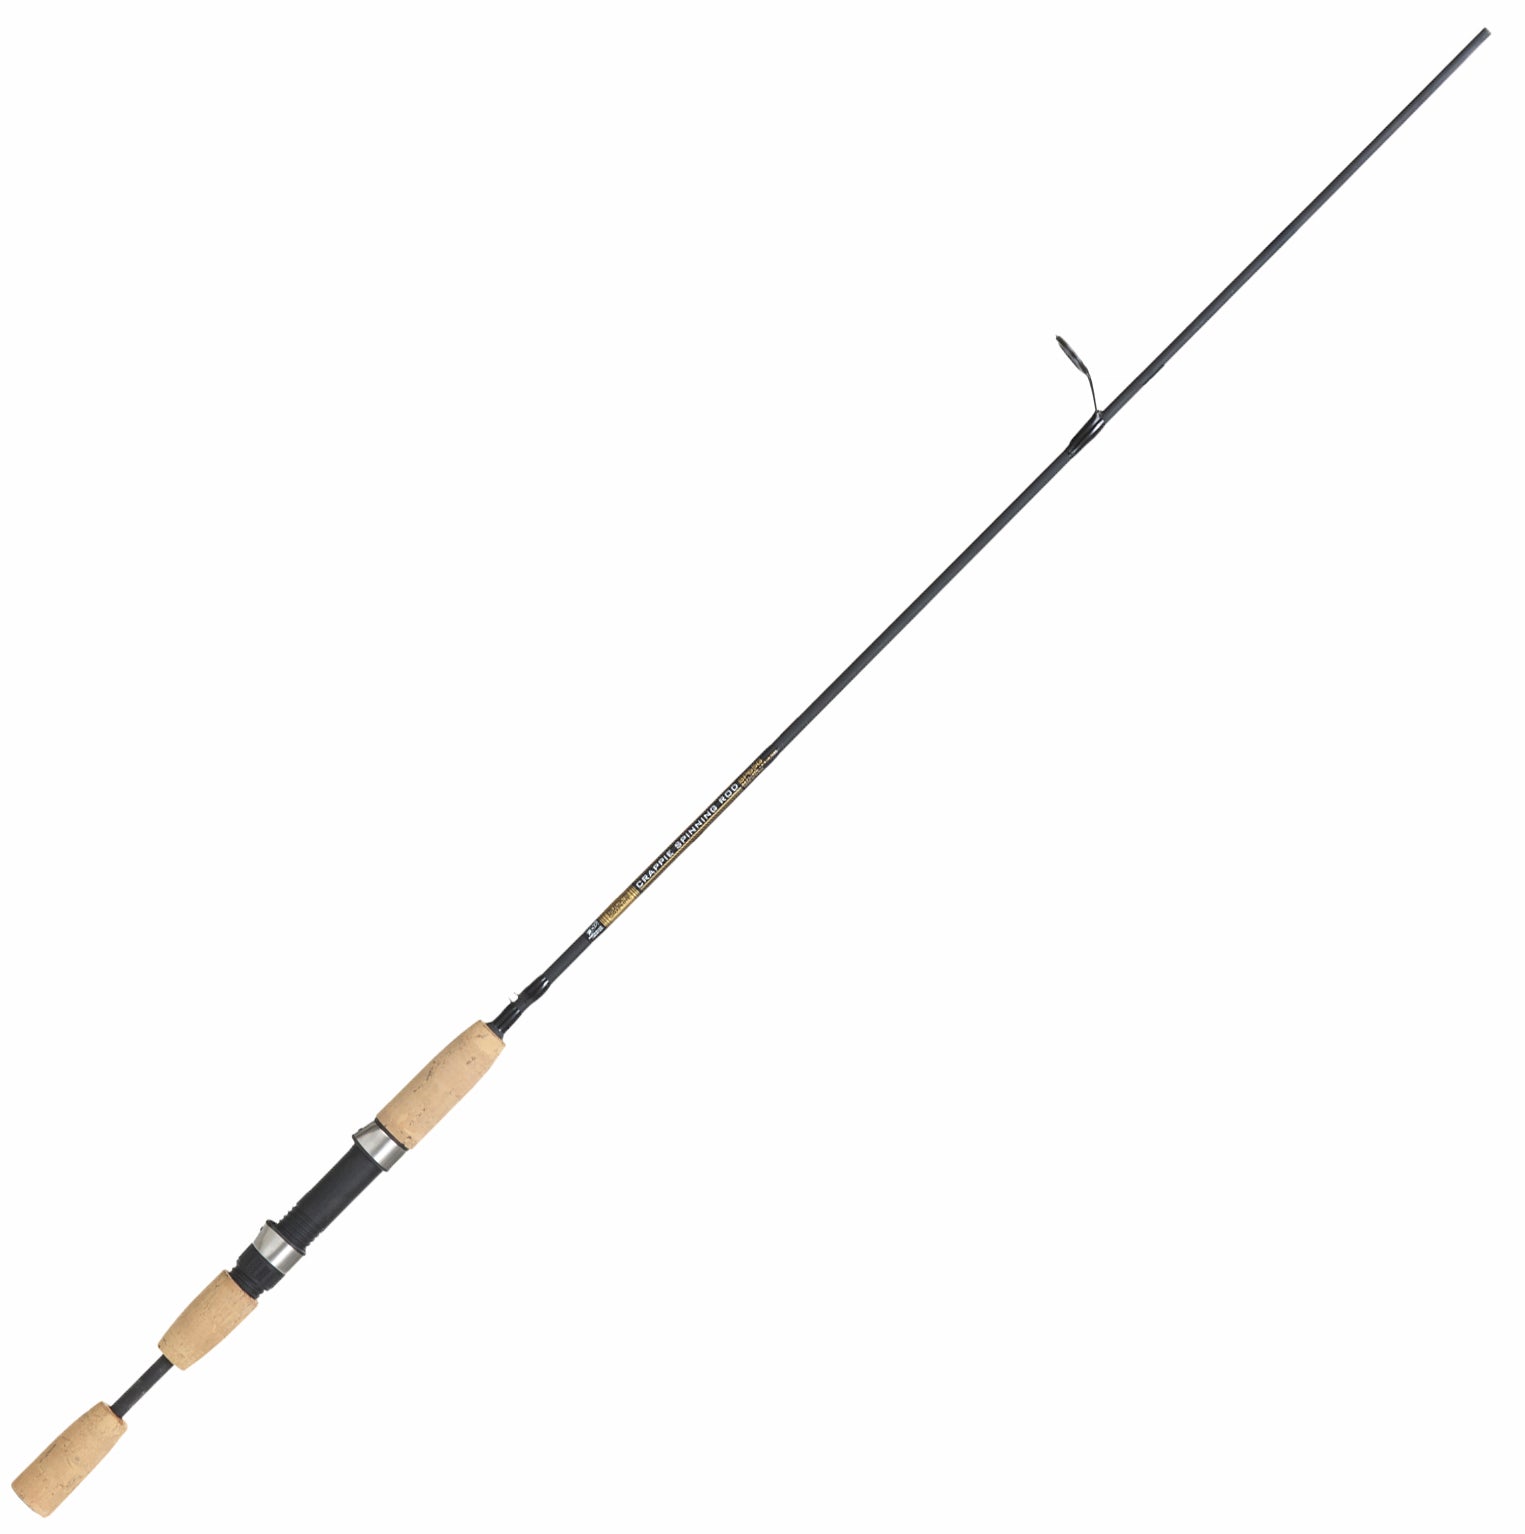 Buck's Graphite Crappie Spinning Rods - B'n'M Pole Company